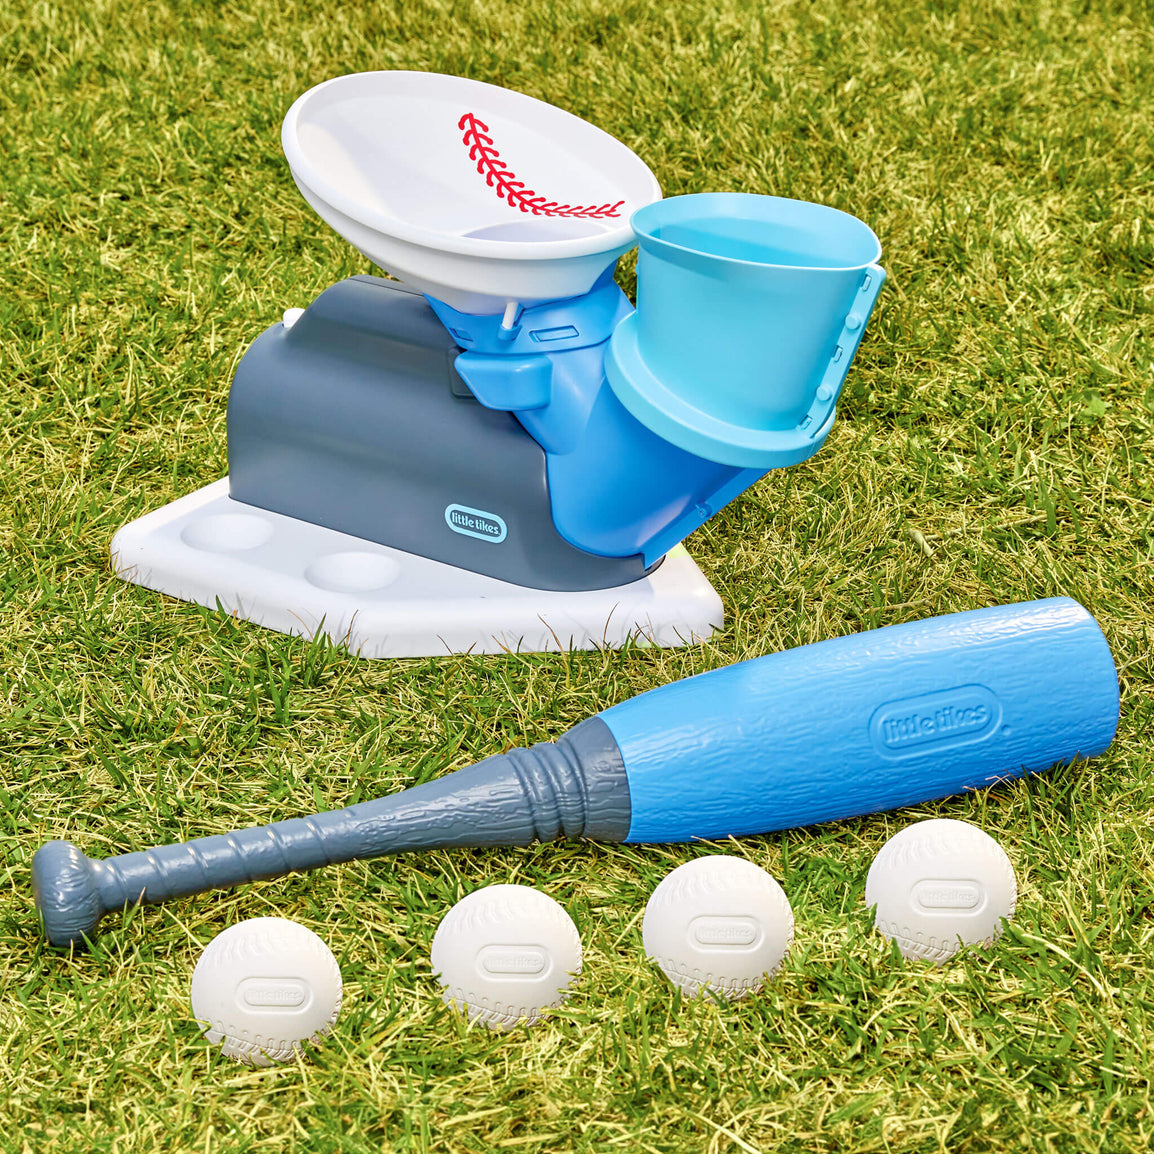 2-in-1 Pop 'n Pitch Trainer